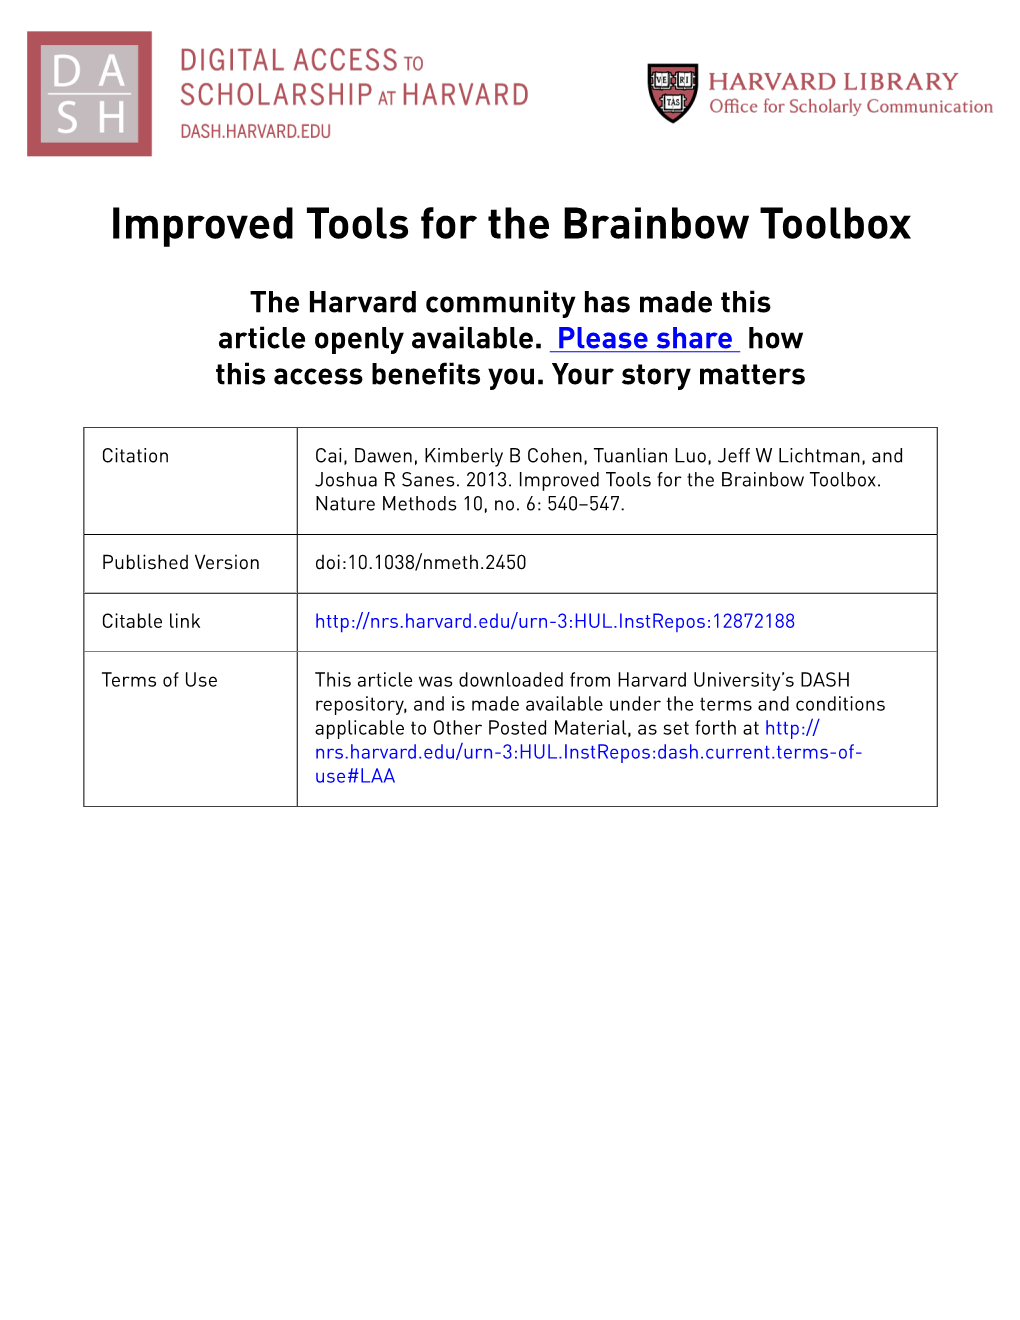 Improved Tools for the Brainbow Toolbox